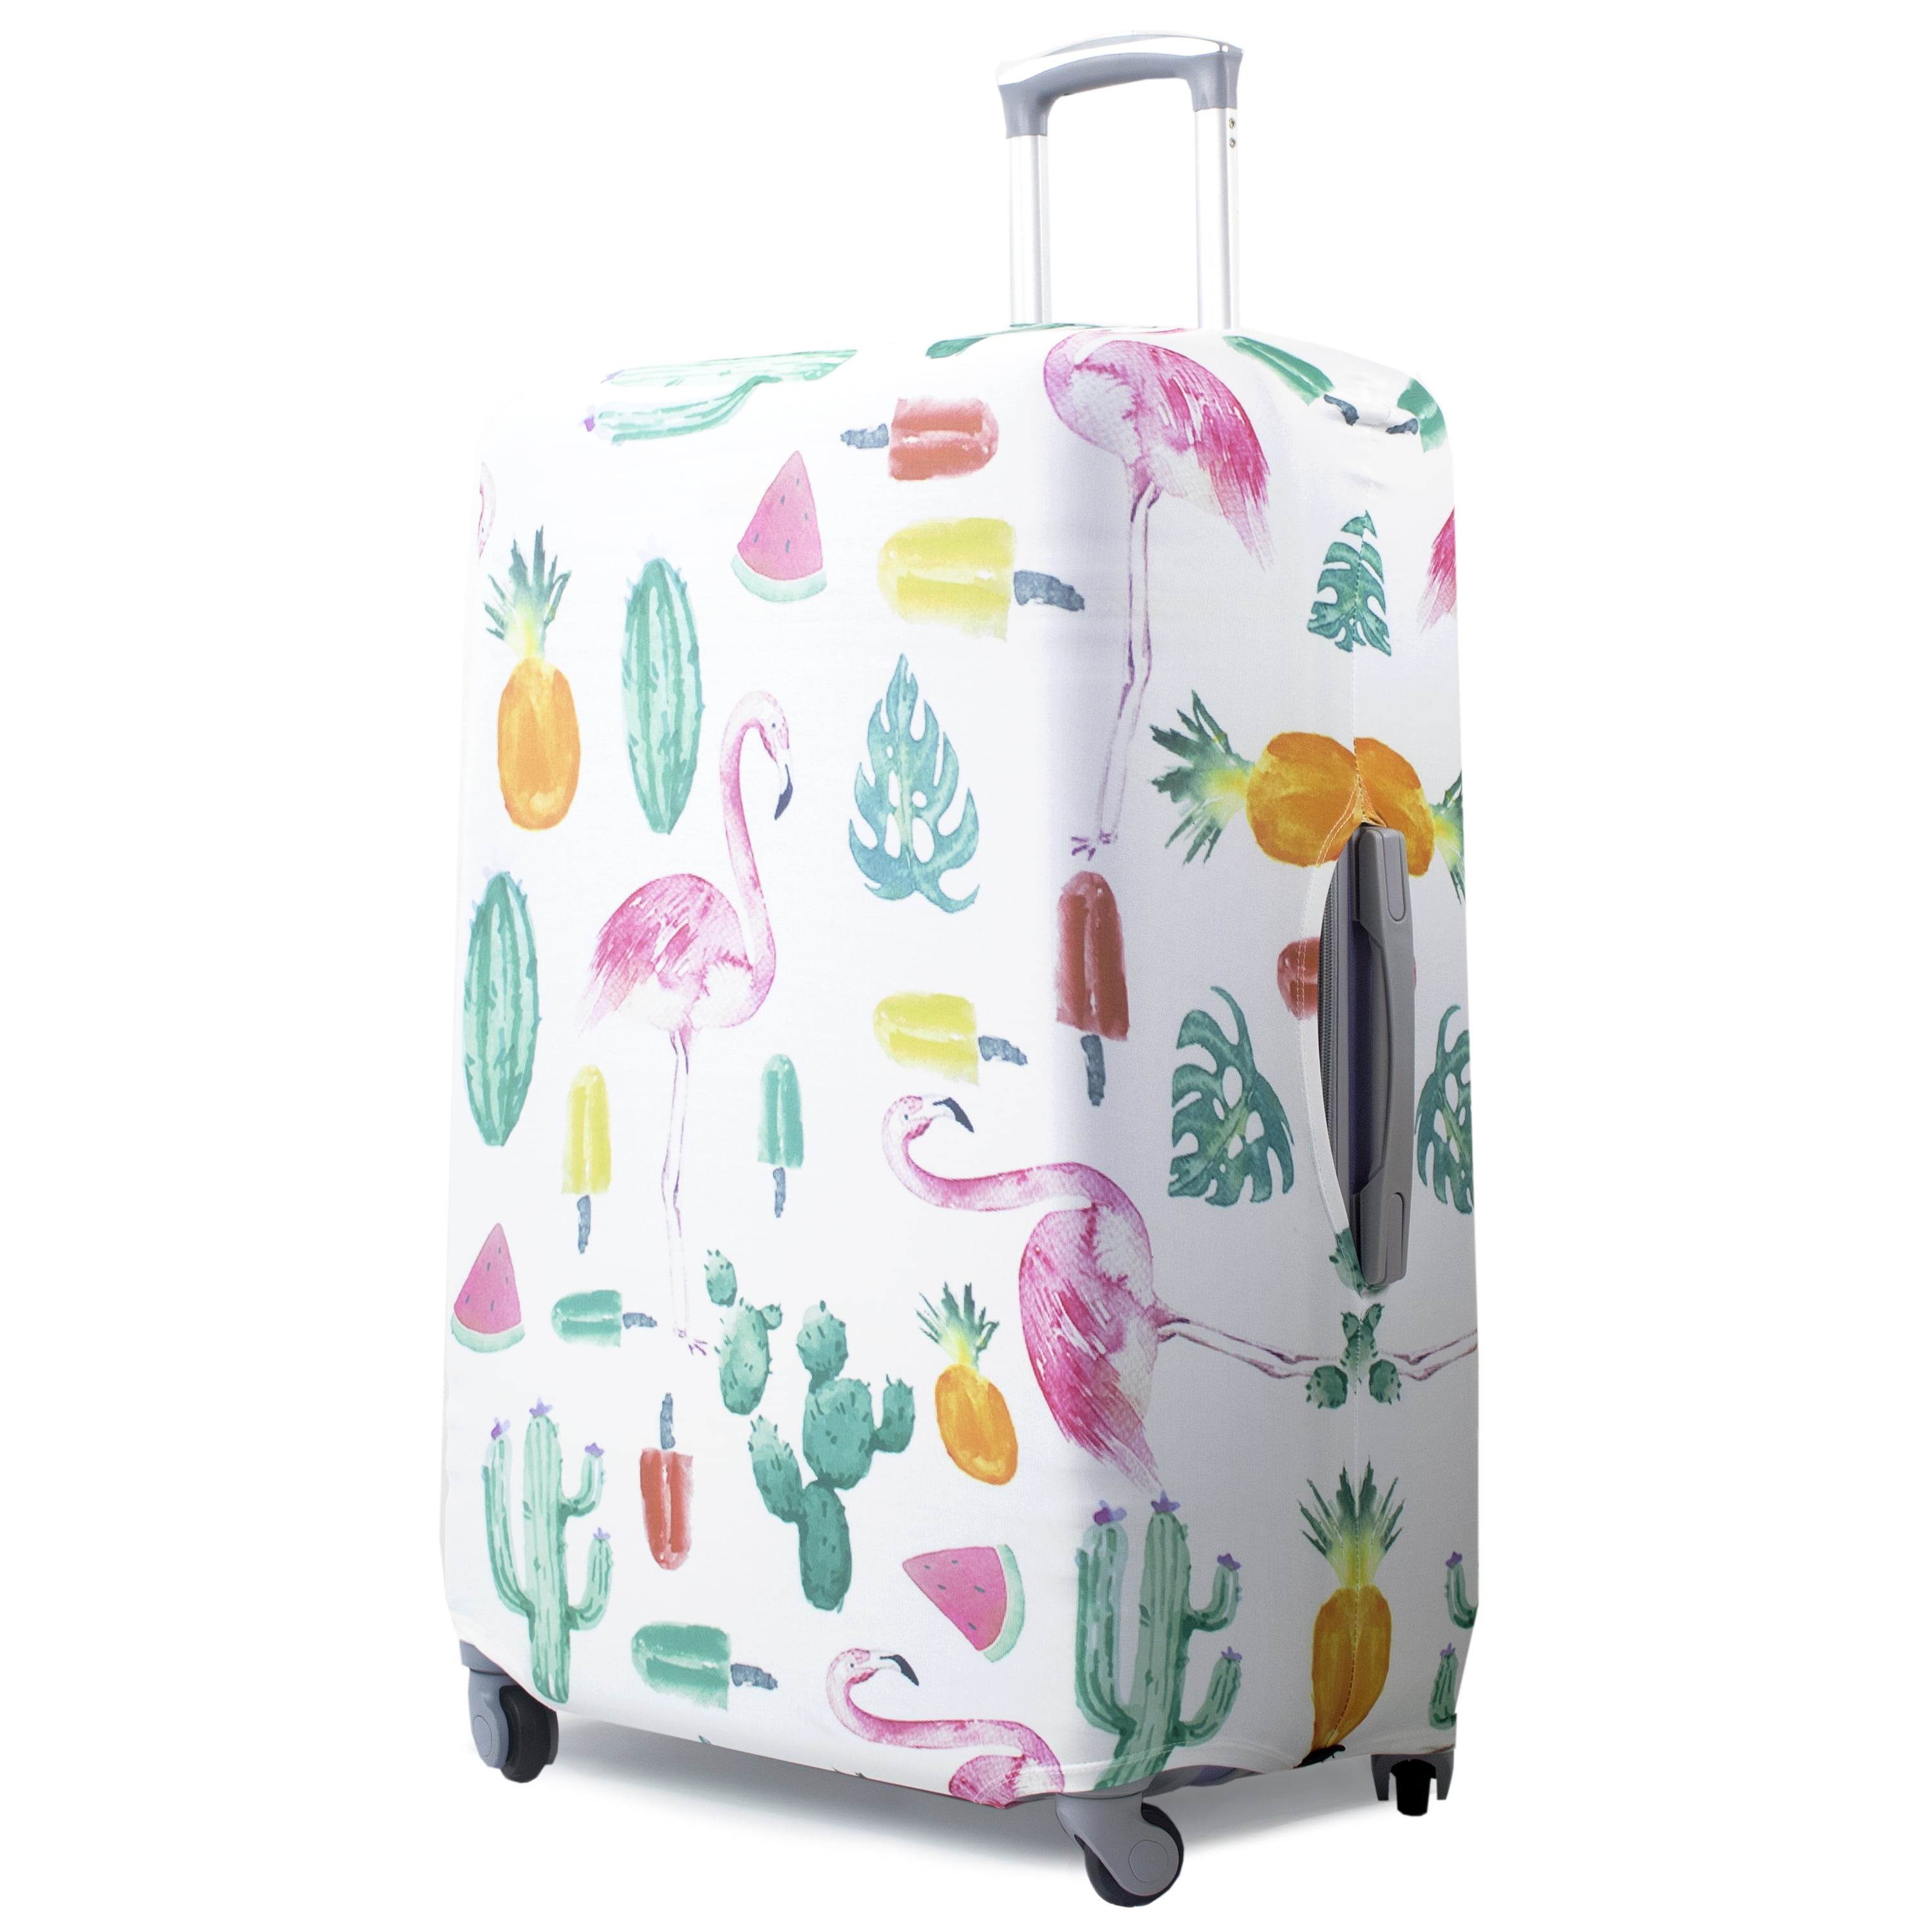 FOLPPLY Flamingo Pineapple Watermelon Luggage Cover Baggage Suitcase Travel Protector Fit for 18-32 Inch 